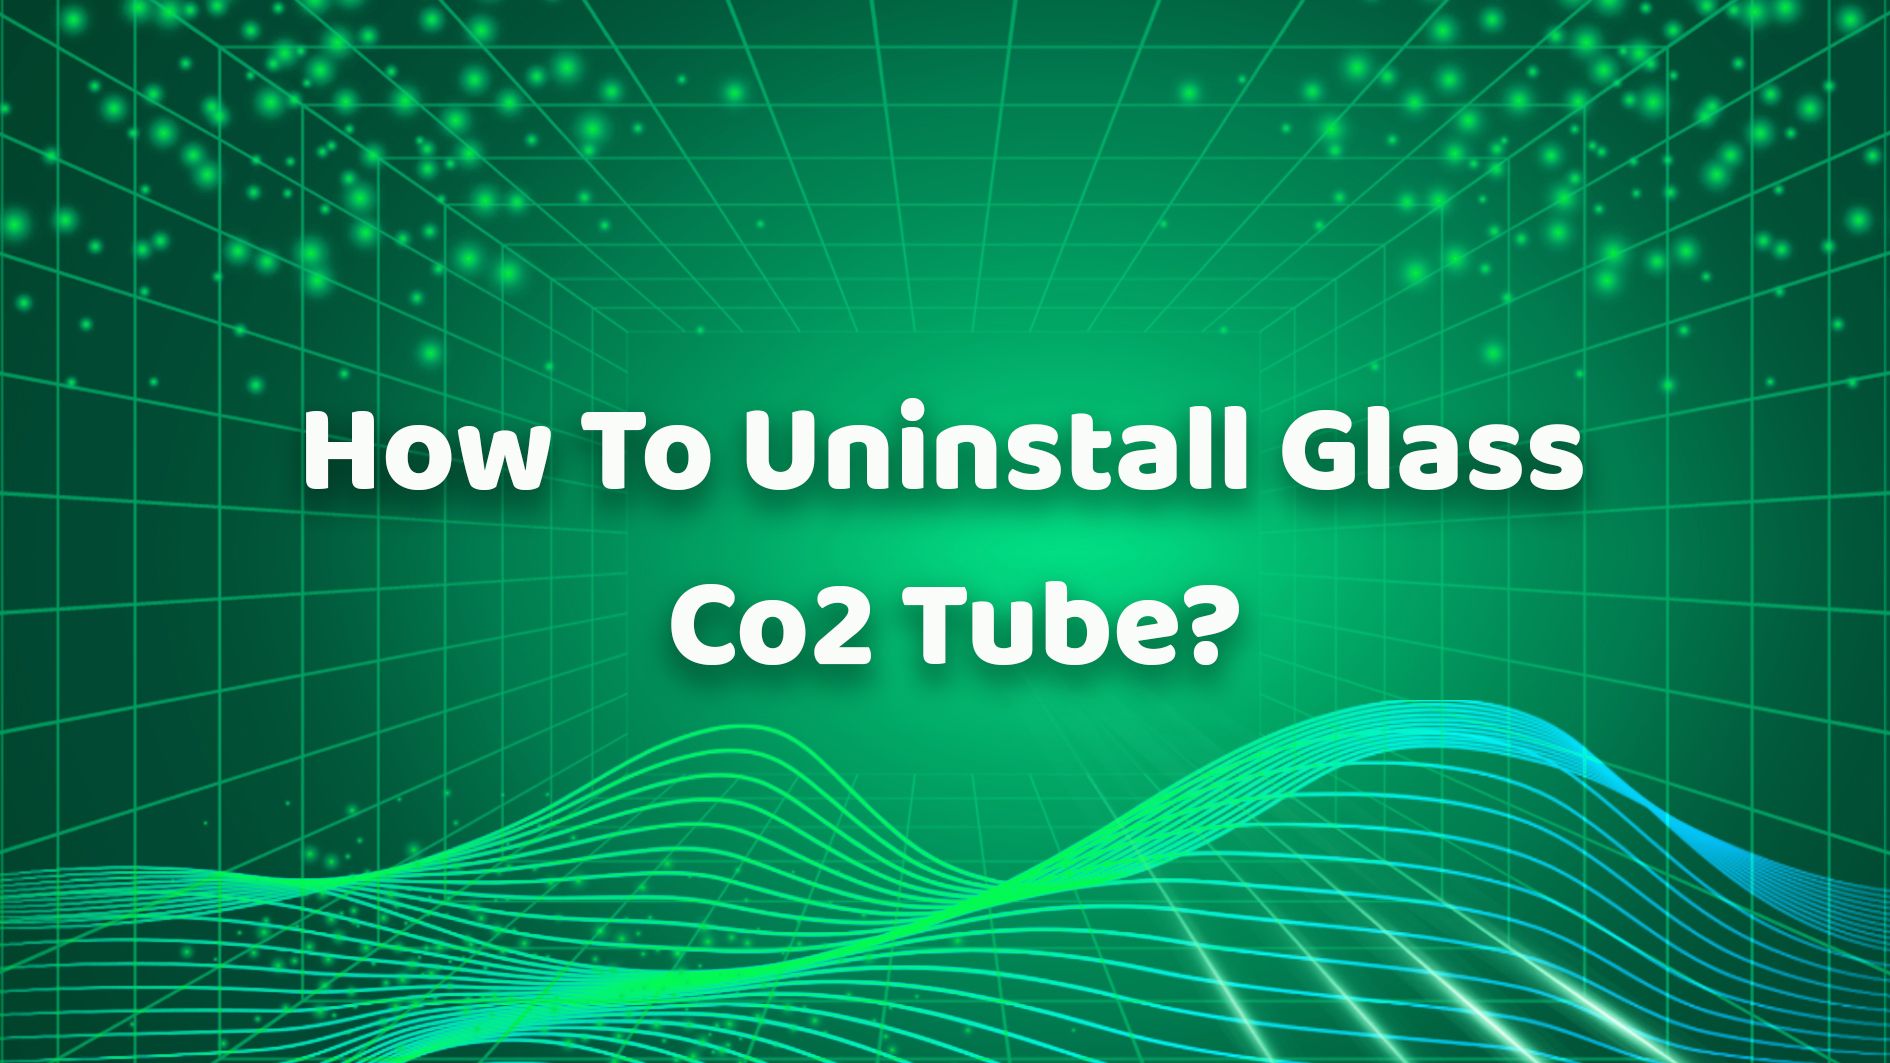 How To Uninstall Glass Co2 Tube？